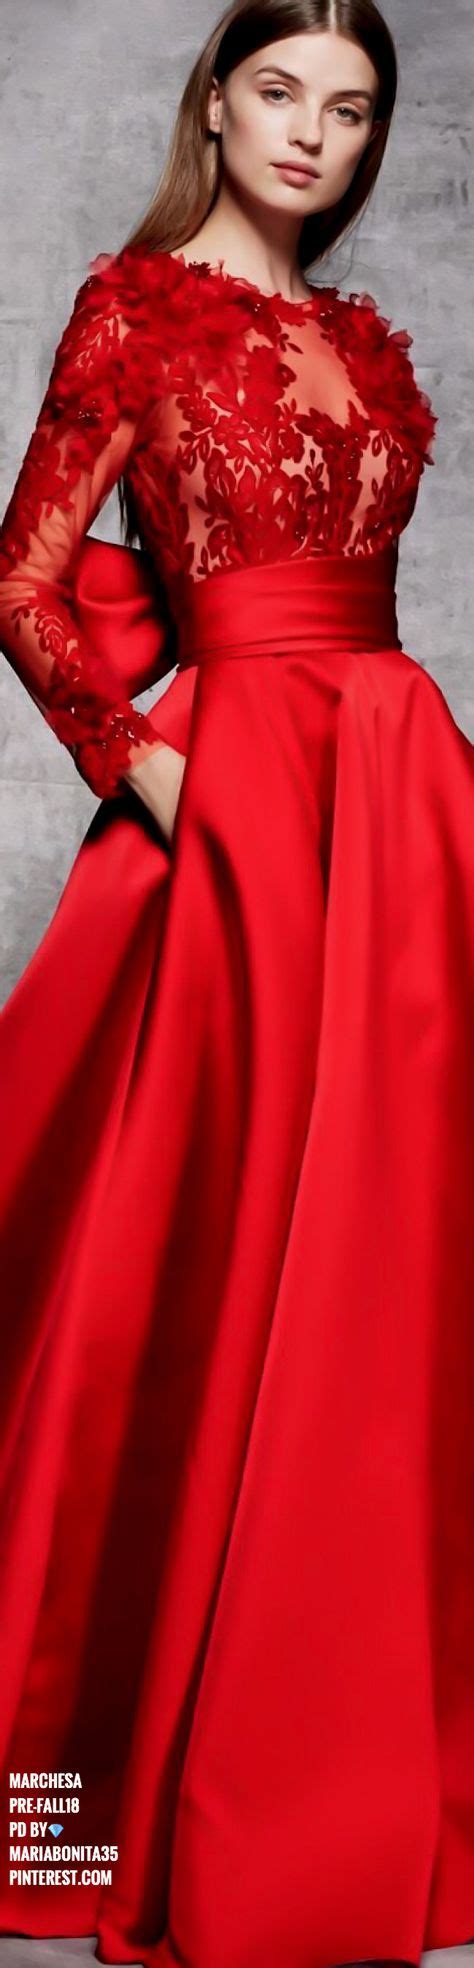 900 red passion ideas in 2021 red fashion lady in